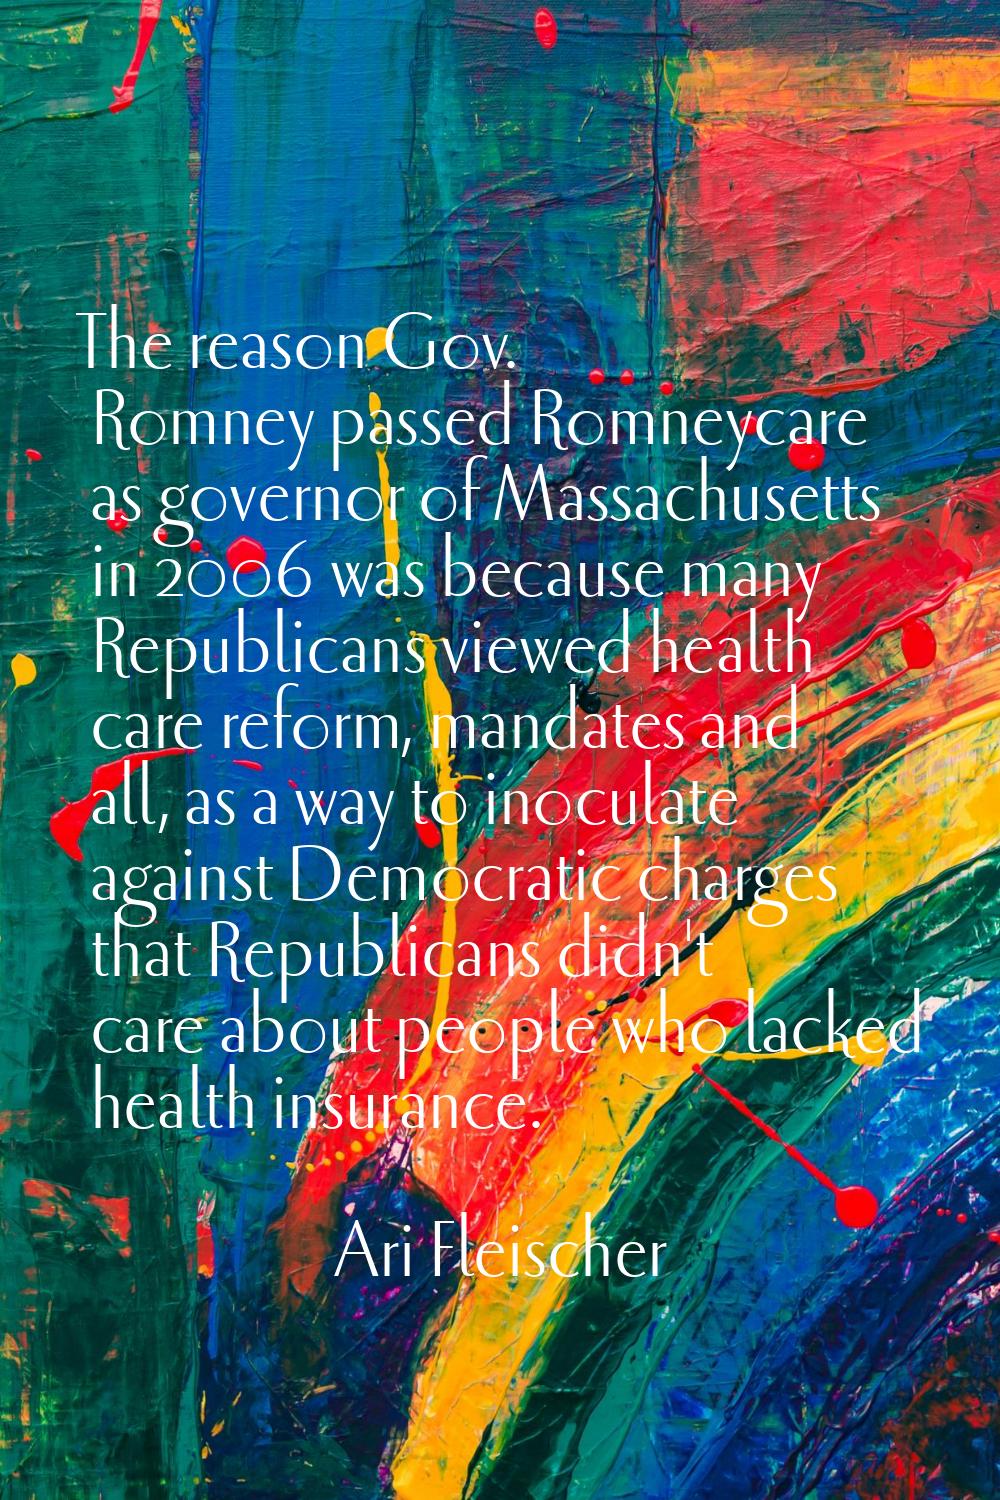 The reason Gov. Romney passed Romneycare as governor of Massachusetts in 2006 was because many Repu